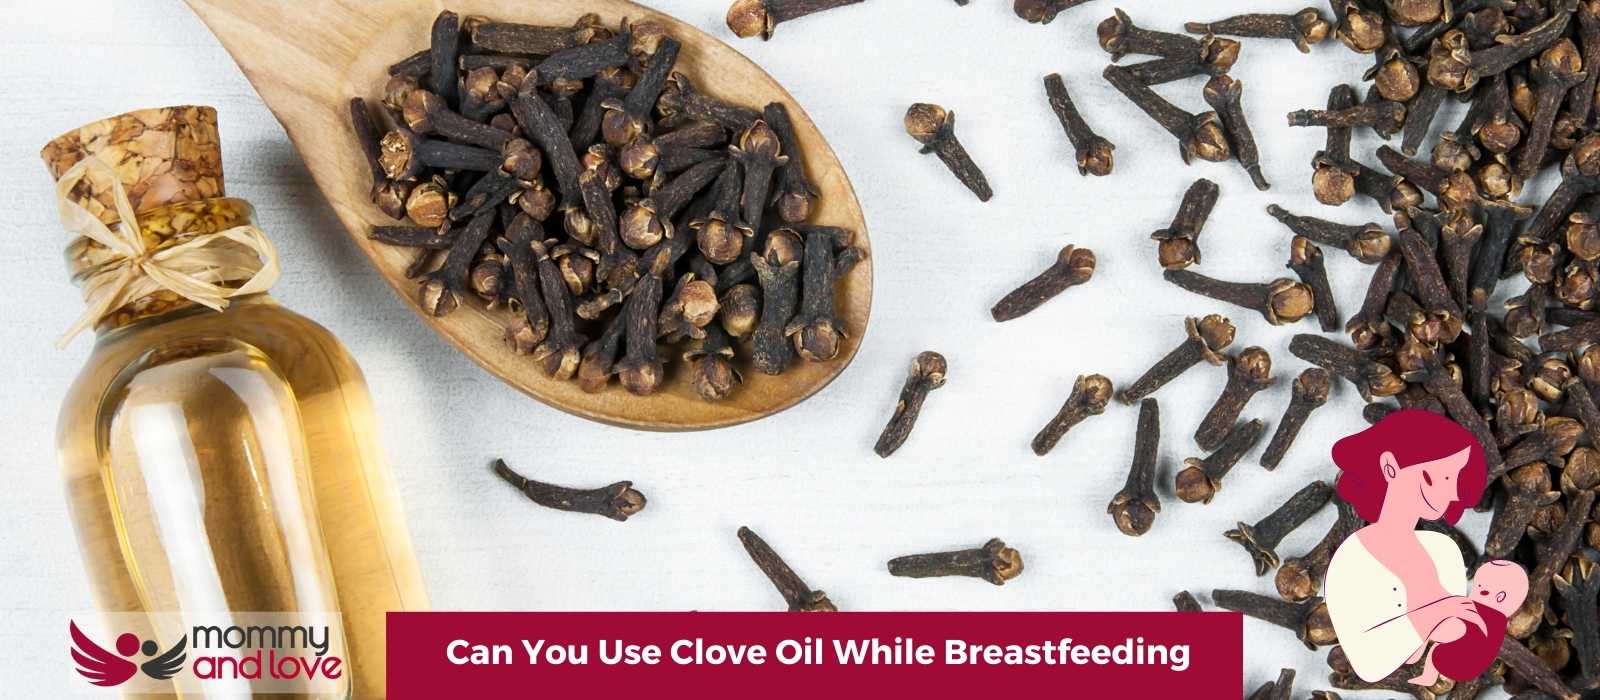 Can You Use Clove Oil While Breastfeeding